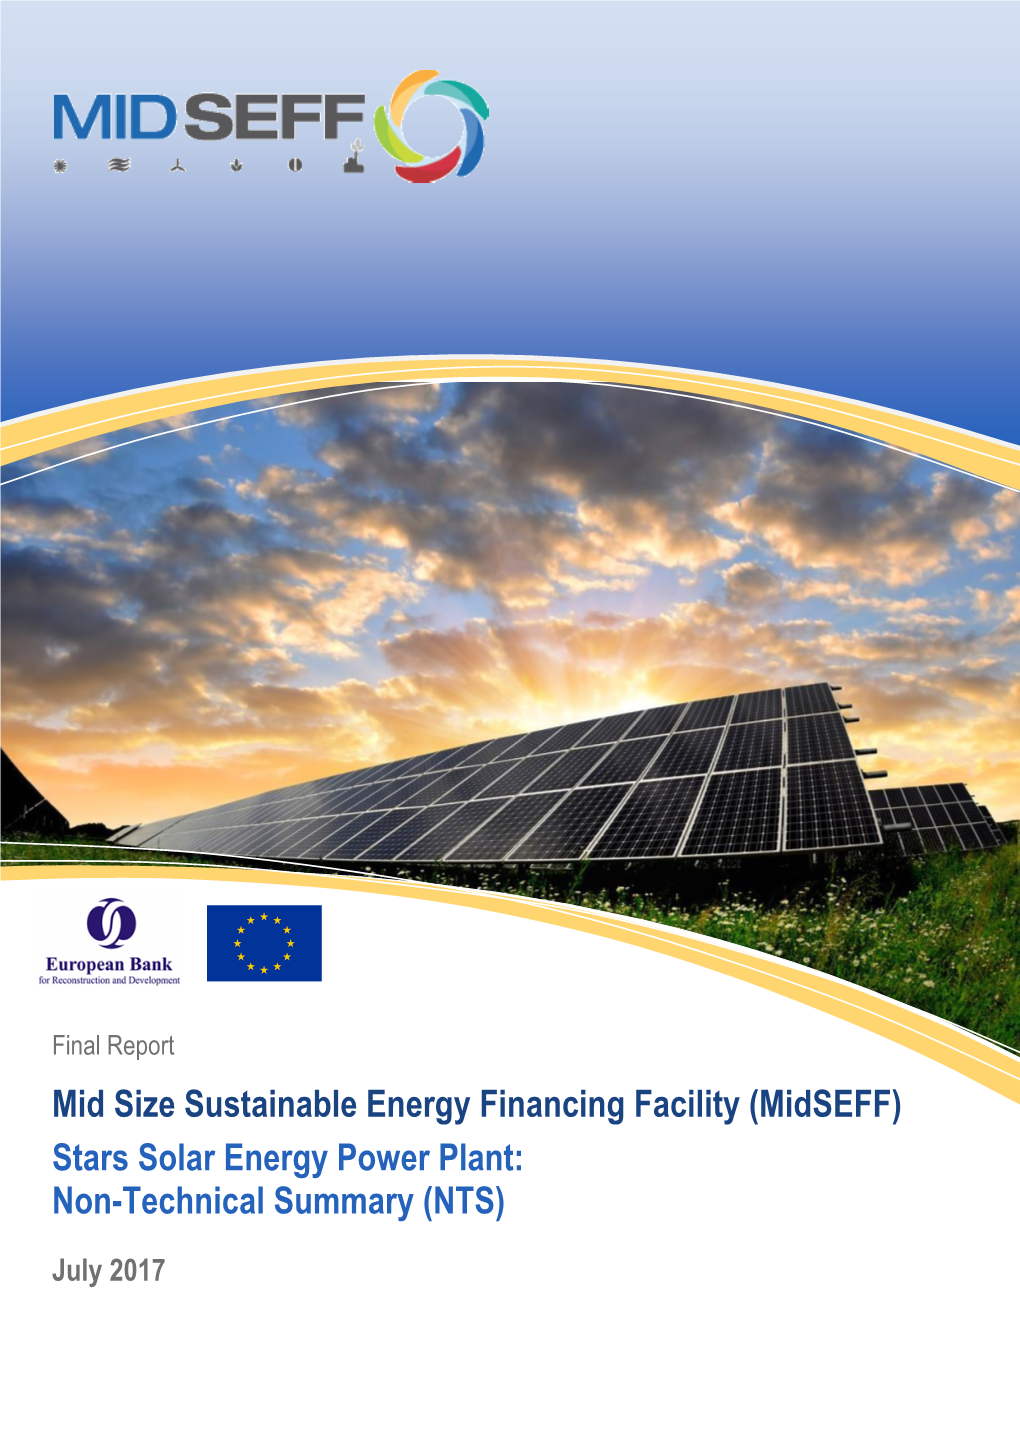 Mid Size Sustainable Energy Financing Facility (Midseff) Stars Solar Energy Power Plant: Non-Technical Summary (NTS)